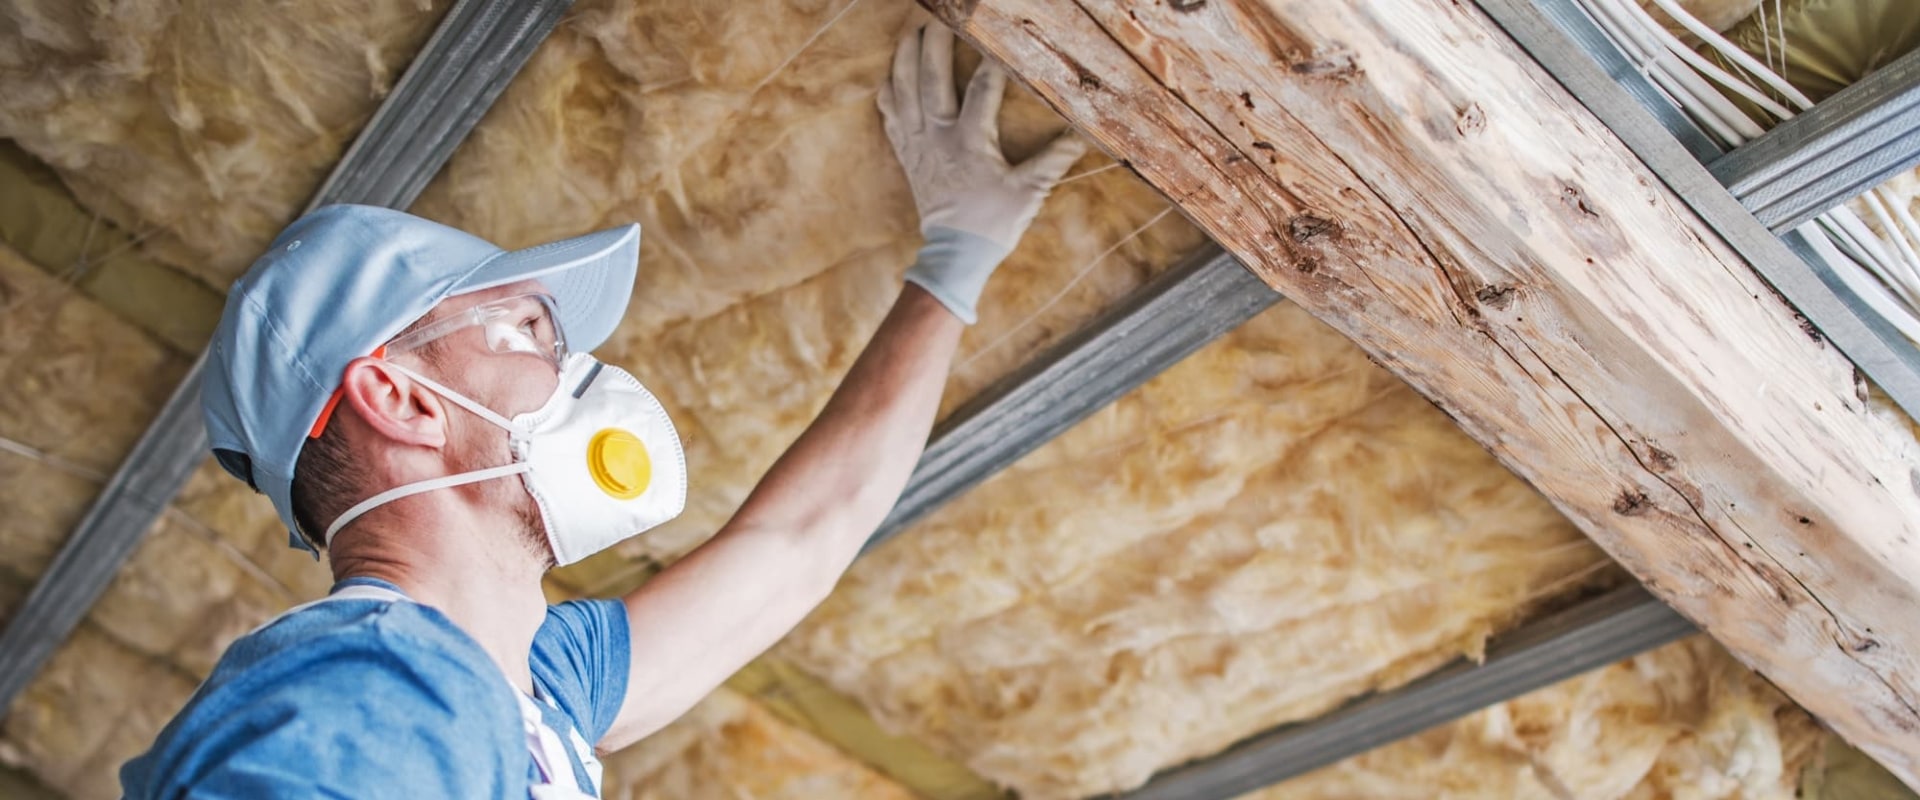 Installing Attic Insulation in West Palm Beach, FL: What You Need to Know